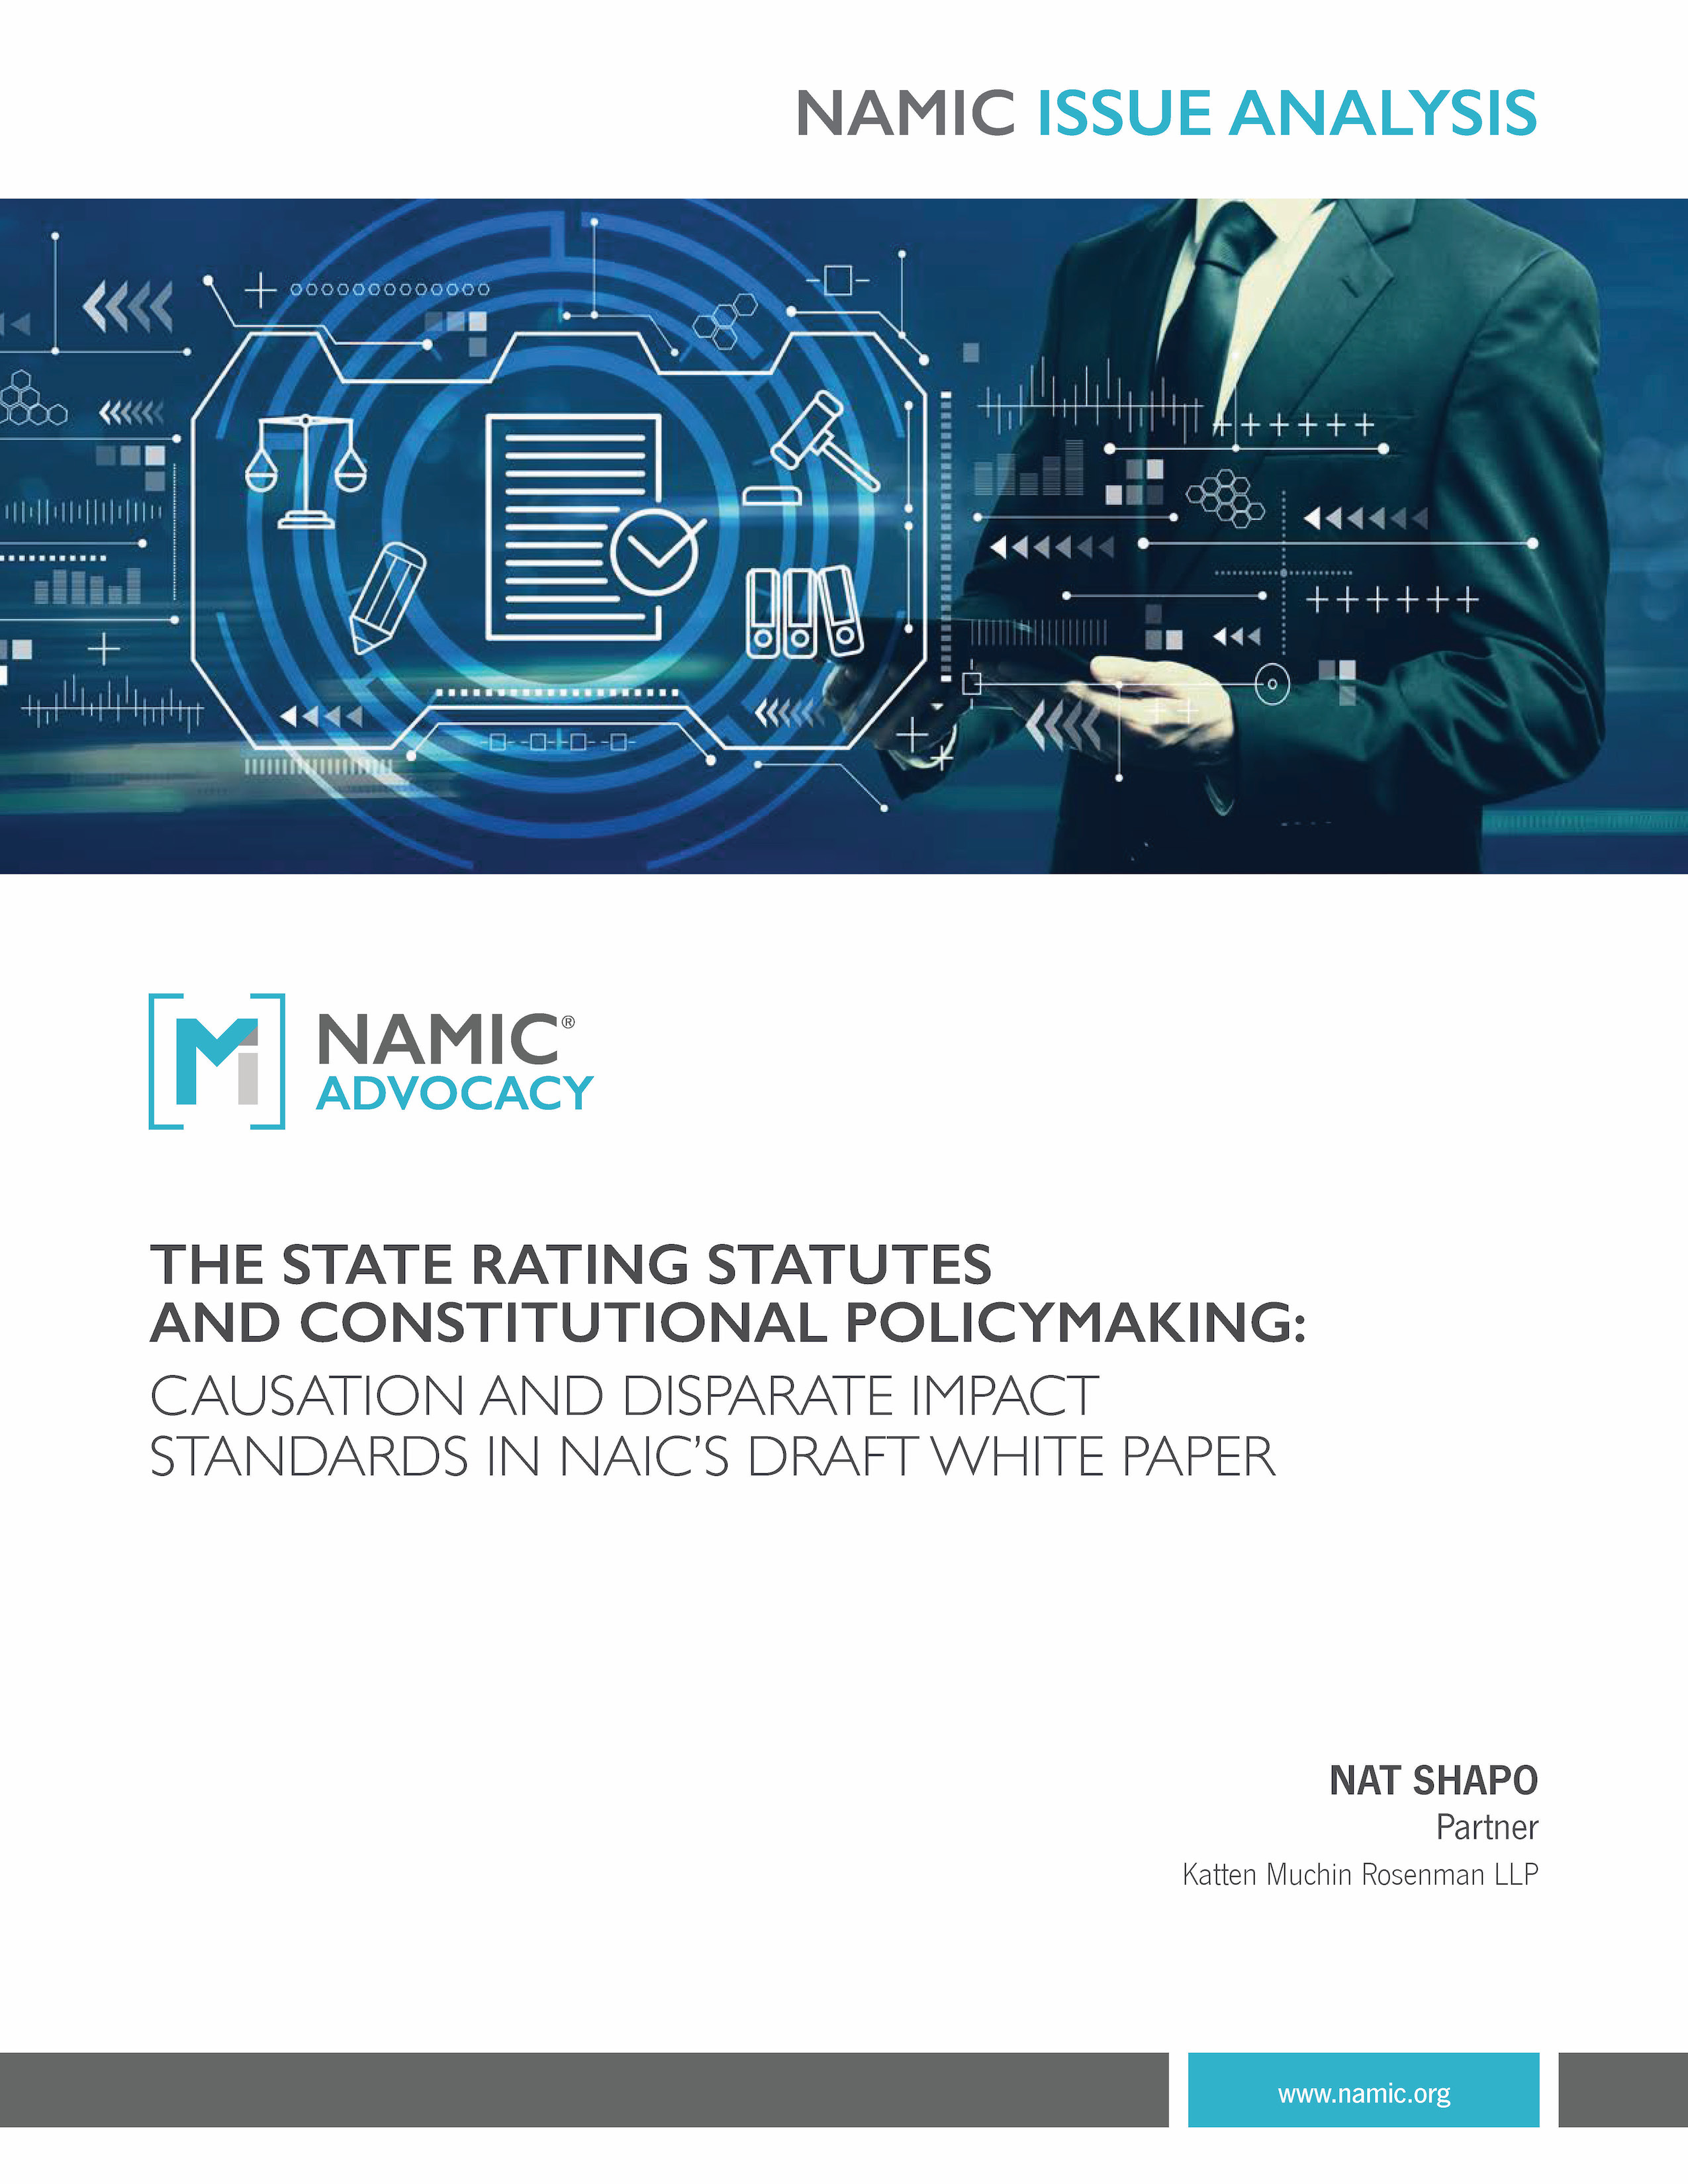 The State Rating Statutes and Constitutional Policymaking: Causation and Disparate Impact Standards in NAIC’s Draft White Paper PDF